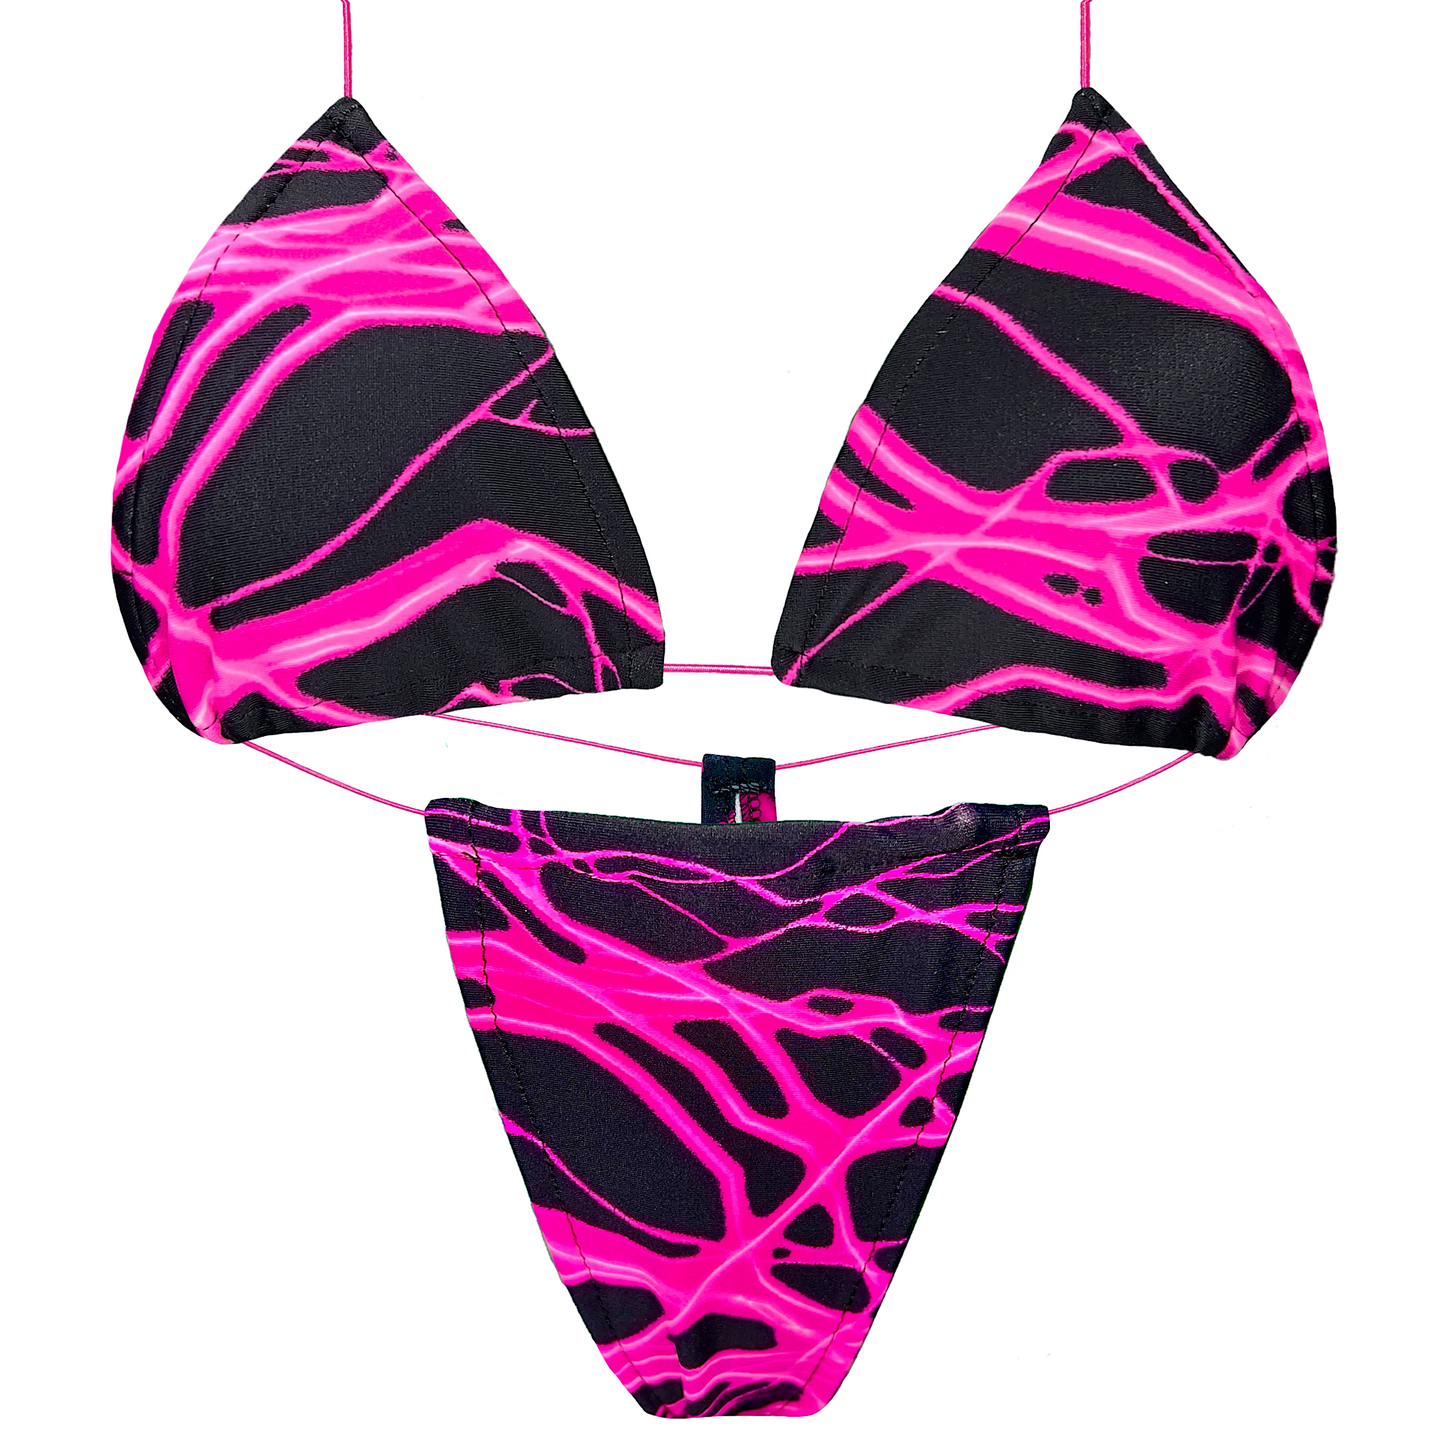 ACE Tieable Microkini: It's Electric Pink